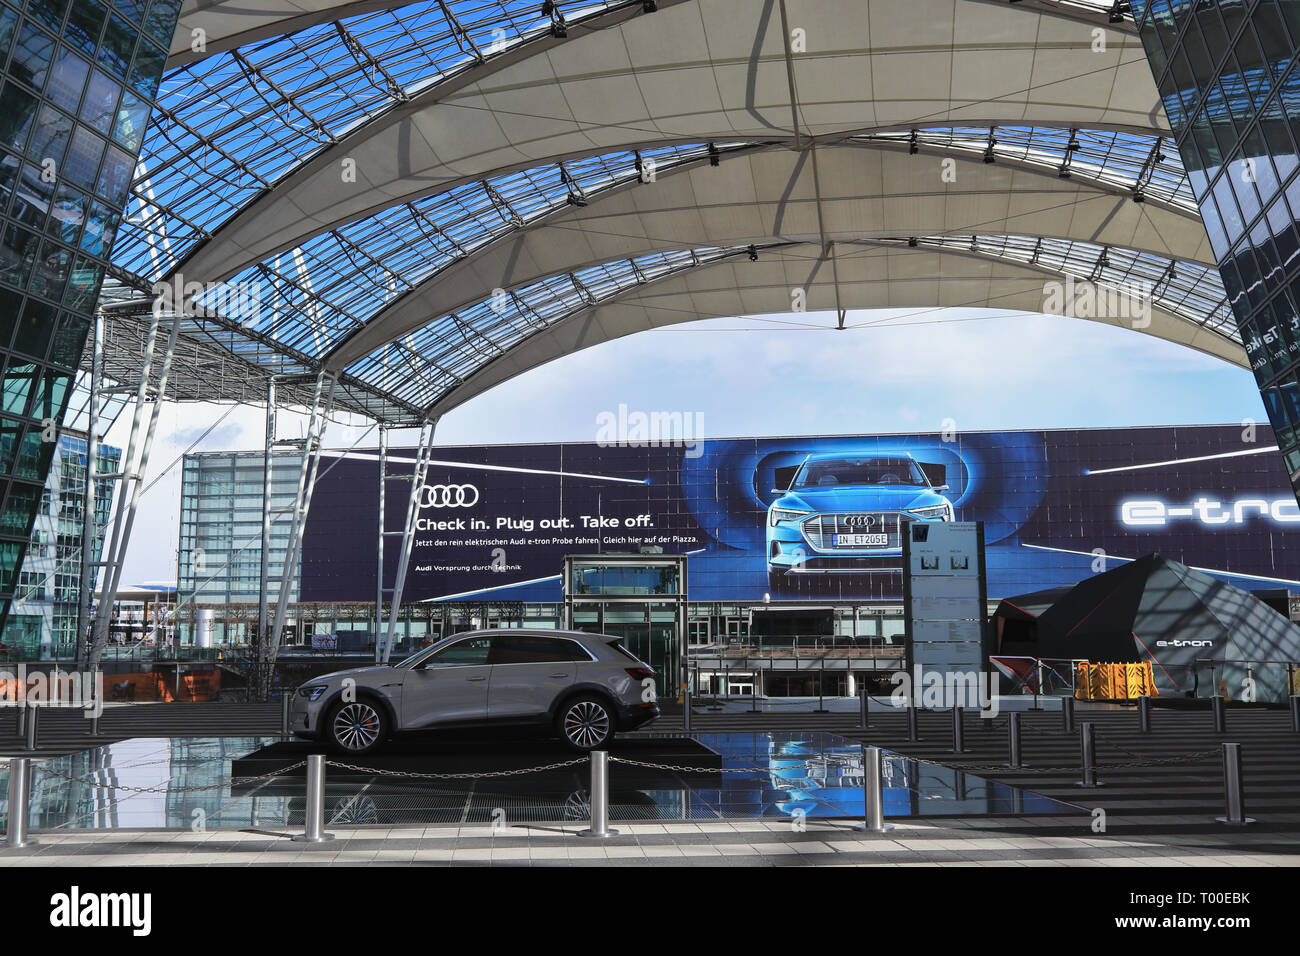 MUNICH AIRPORT, BAVARIA, GERMANY - MARCH 13, 2019: Presentation of brand new Audi e-tron, a compact luxury crossover SUV. Zero emission electric car. Stock Photo